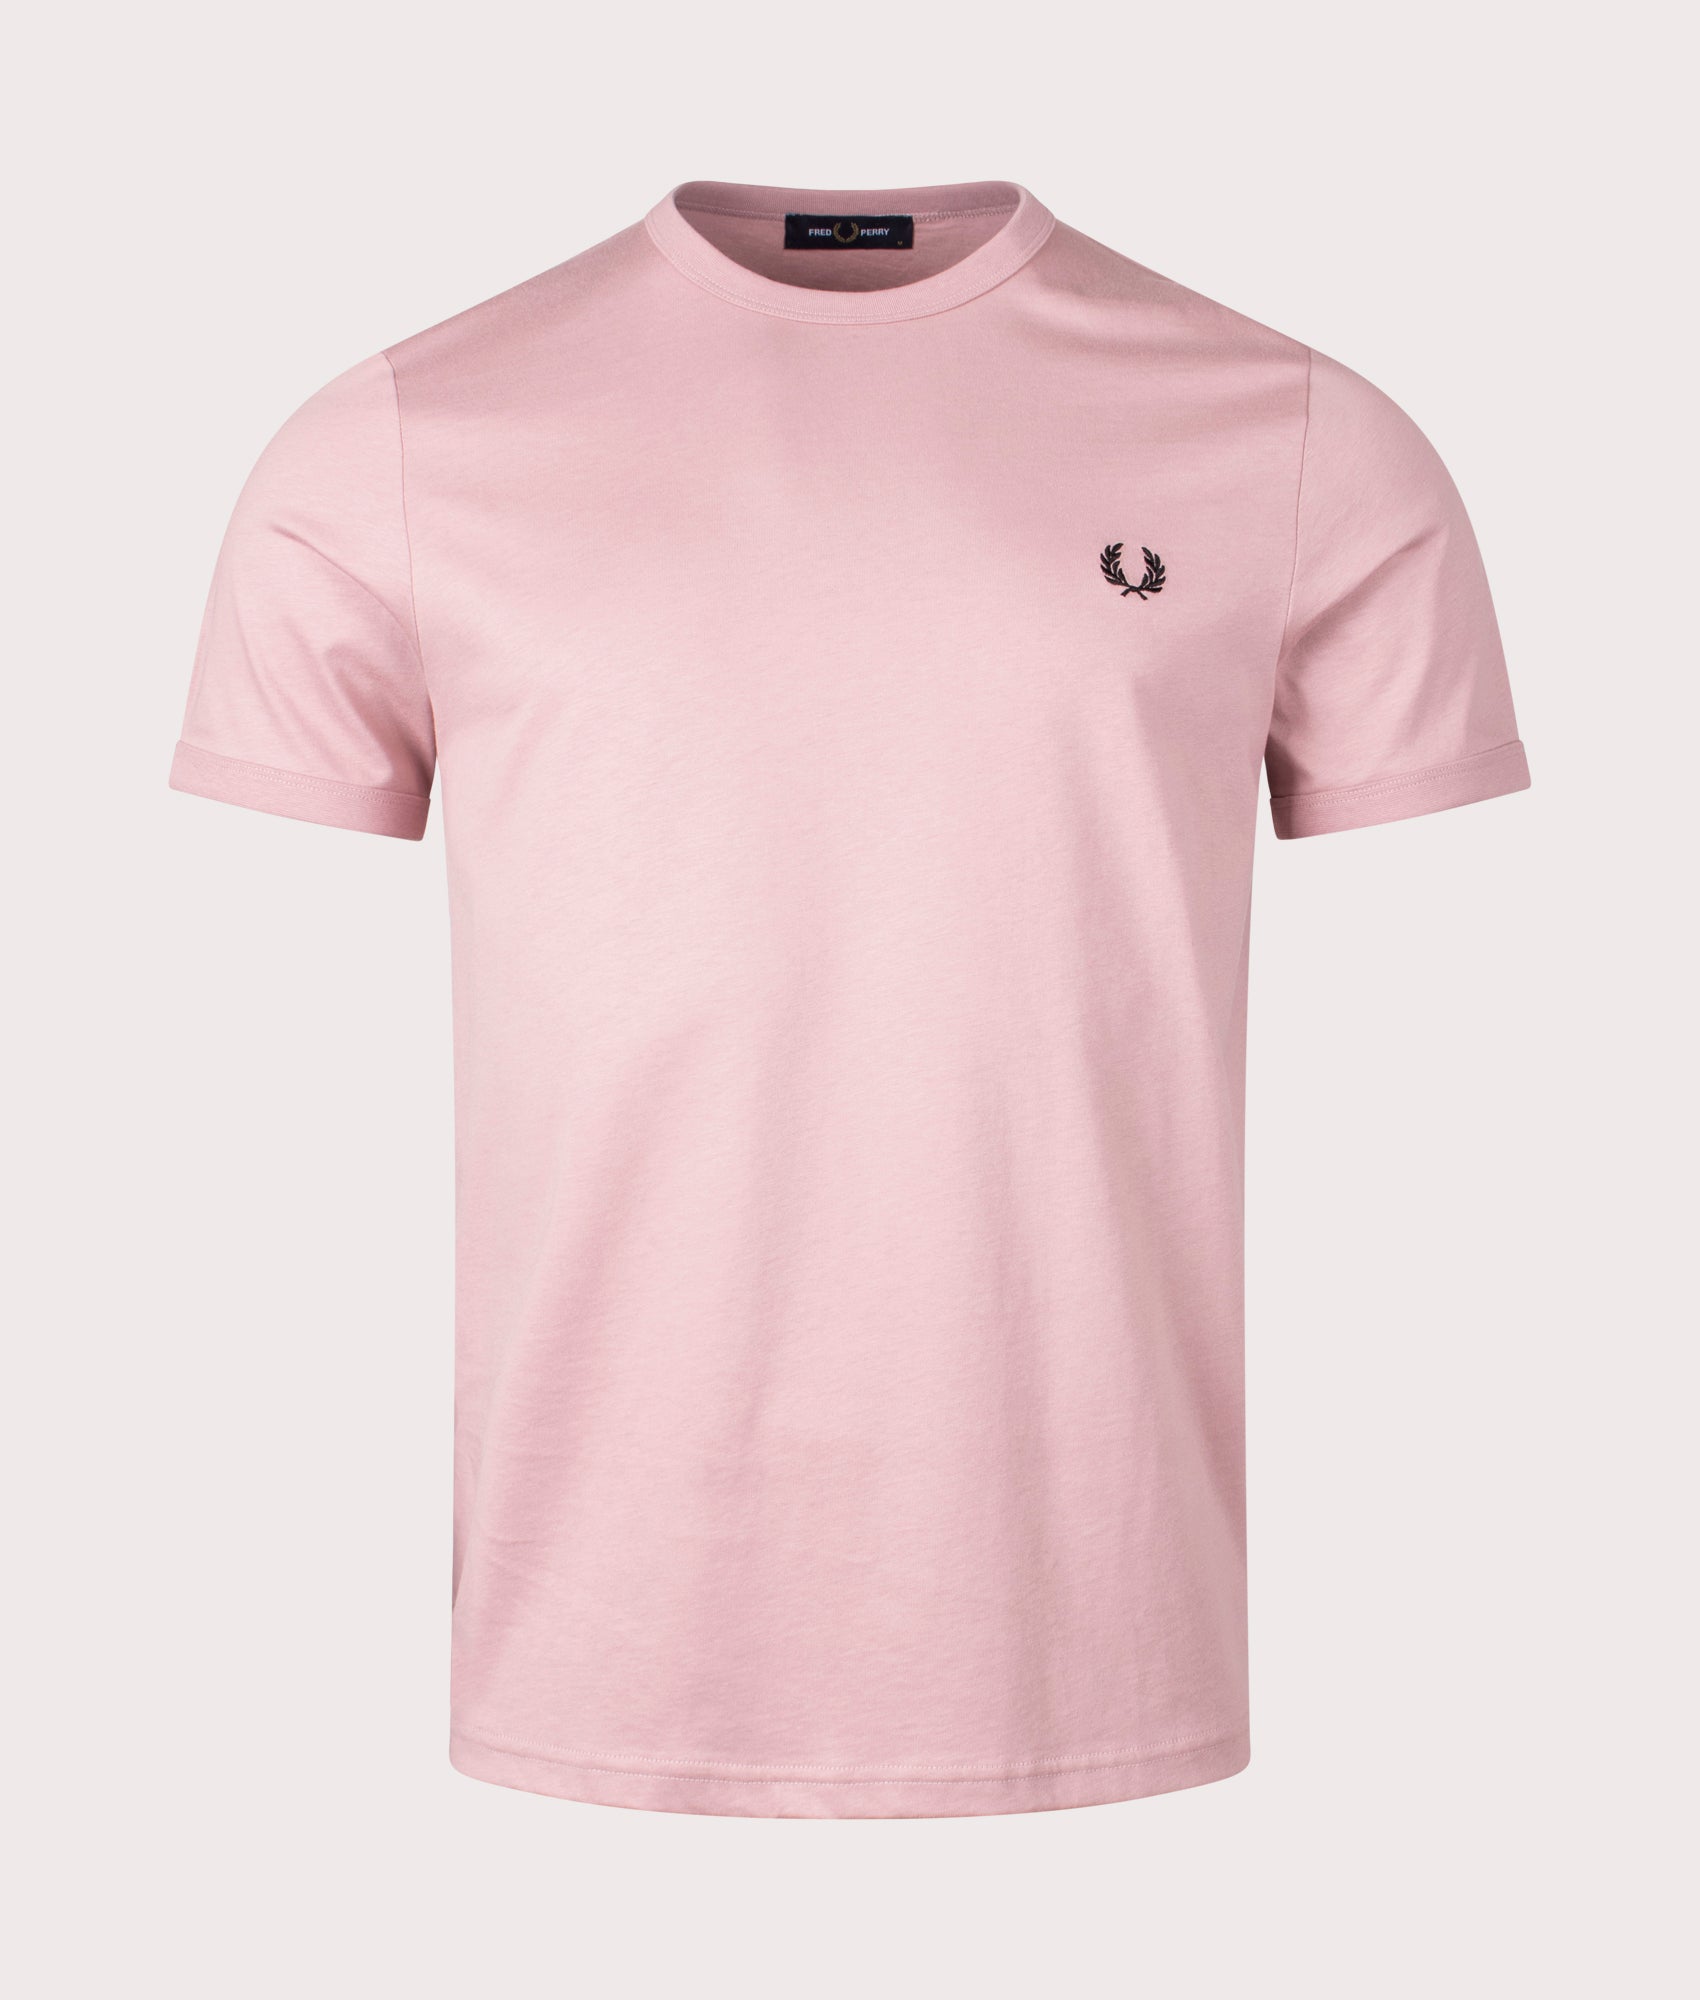 Fred Perry Mens Ringer T-Shirt - Colour: S51 Dusty Rose Pink - Size: Large